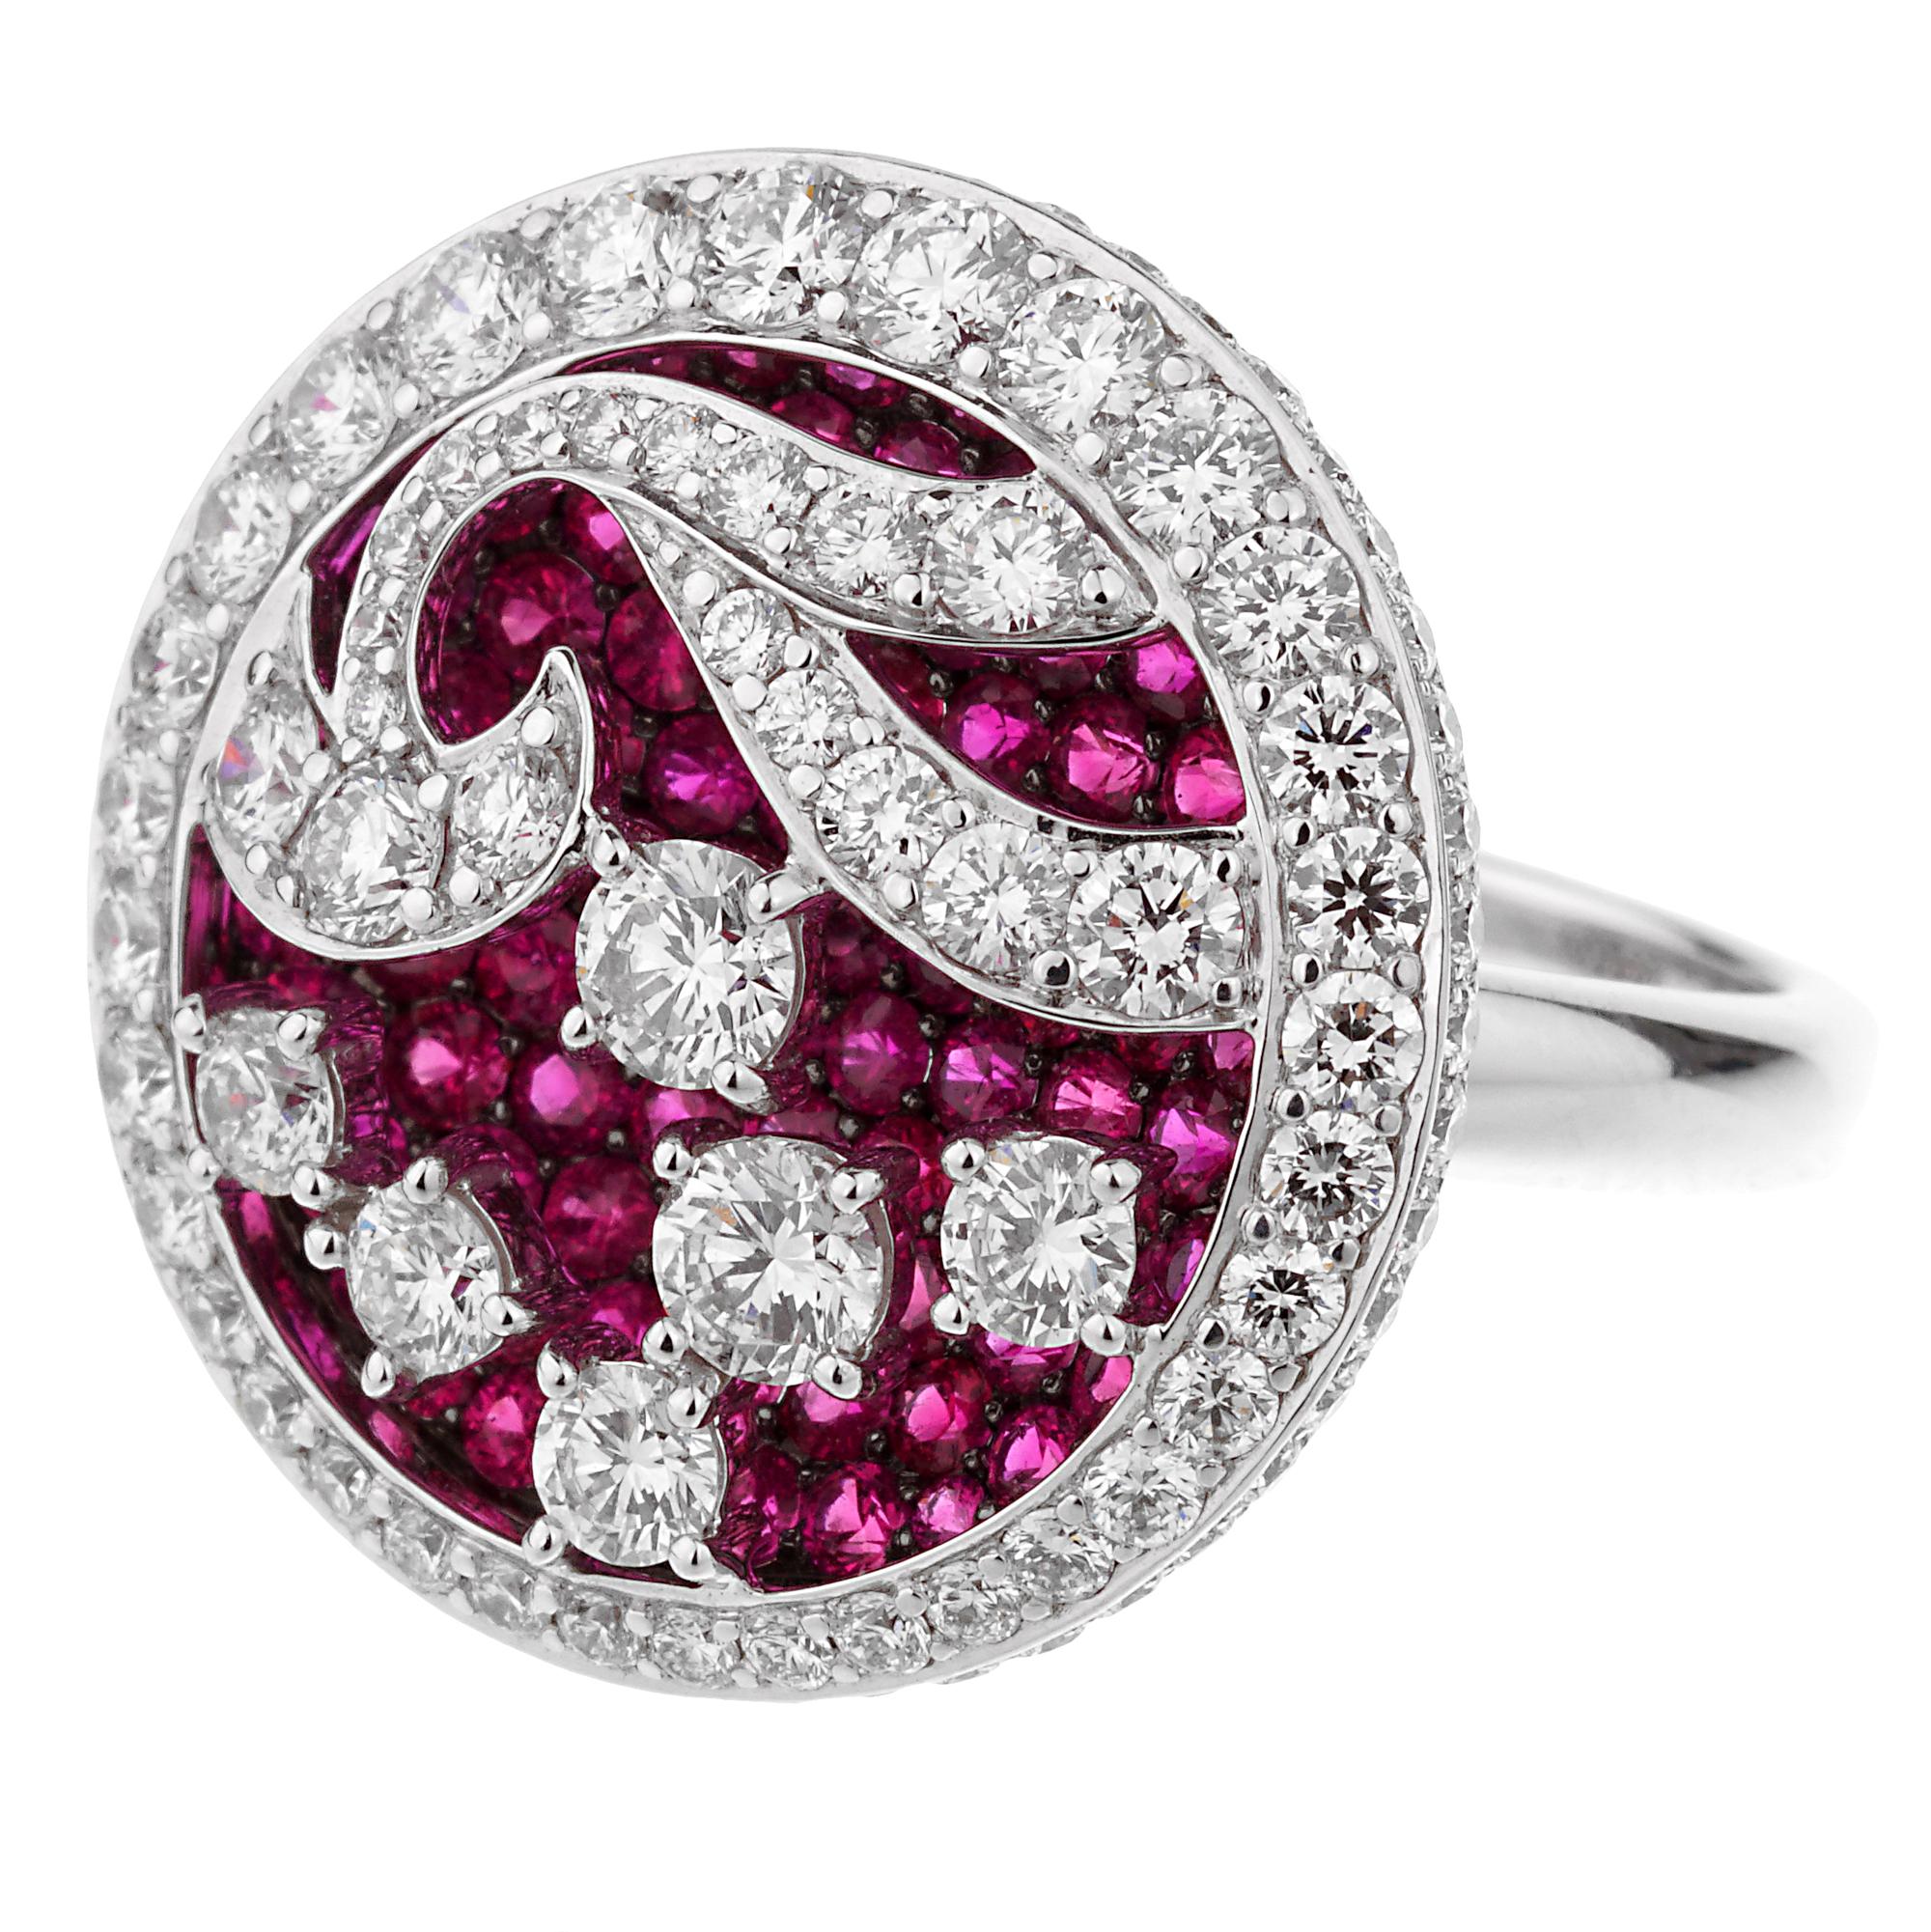 A magnificent Graff cocktail ring showcasing 2.39cts of the finest round brilliant cut diamonds atop of 2.28ct of rubies set in 18k white gold. The ring measures a size 5 1/2 and can be resized if needed.
